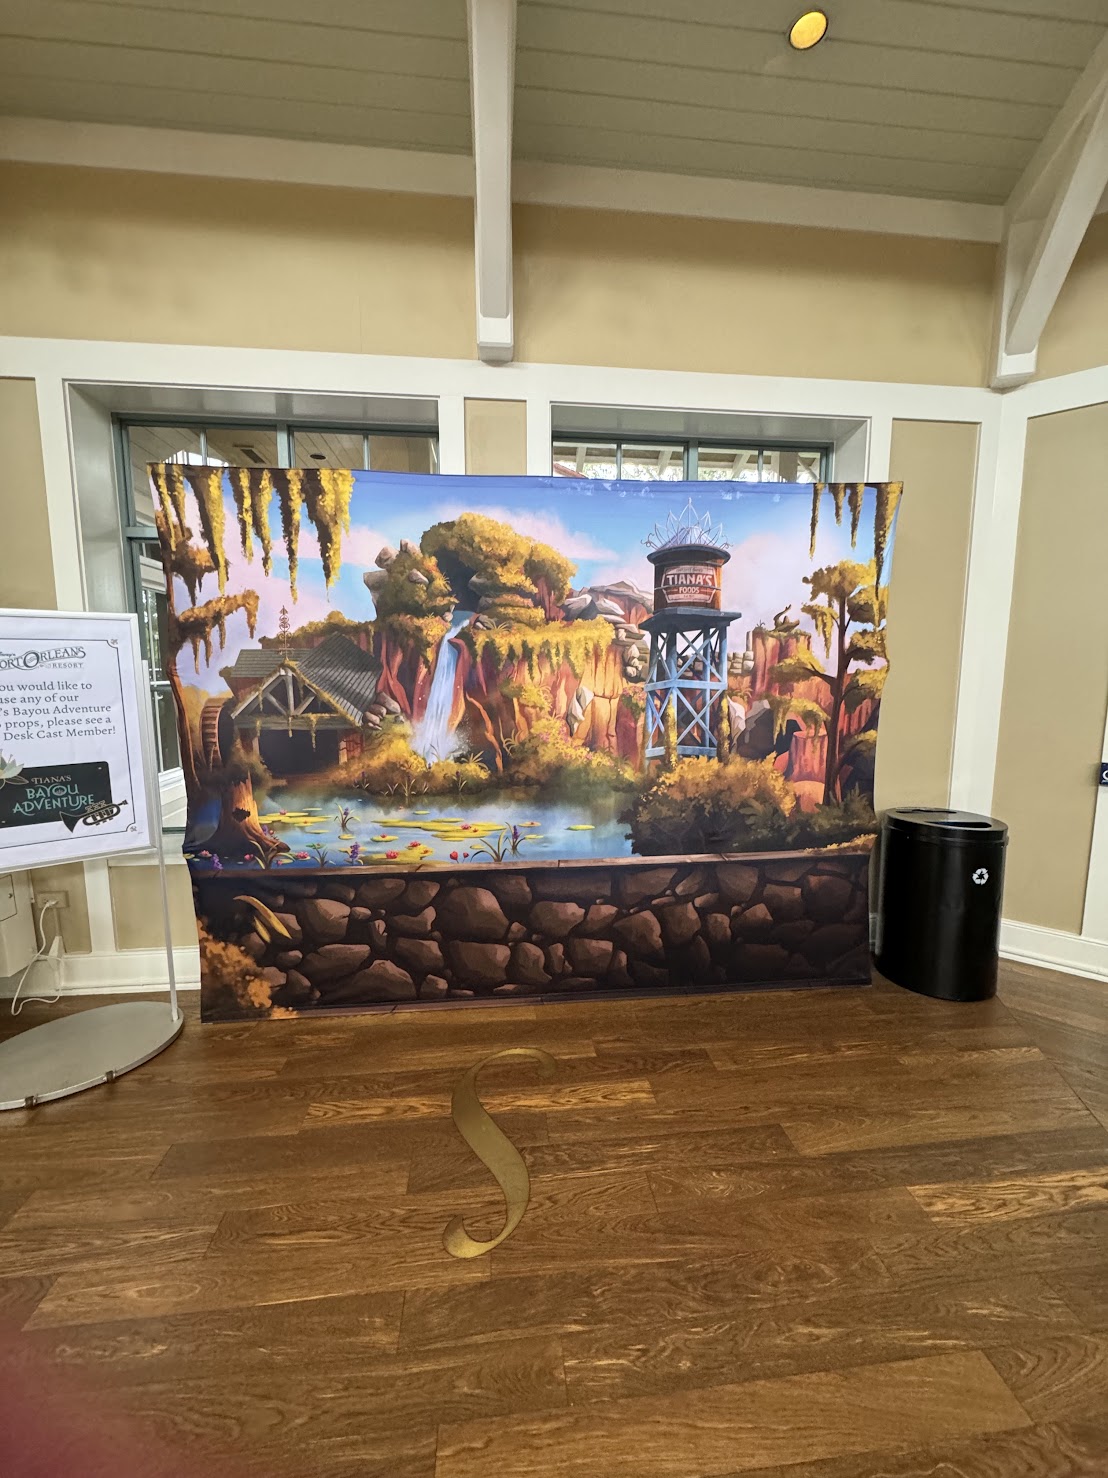 NEW Tiana’s Bayou Adventure Photo Opportunity at Port Orleans Resort